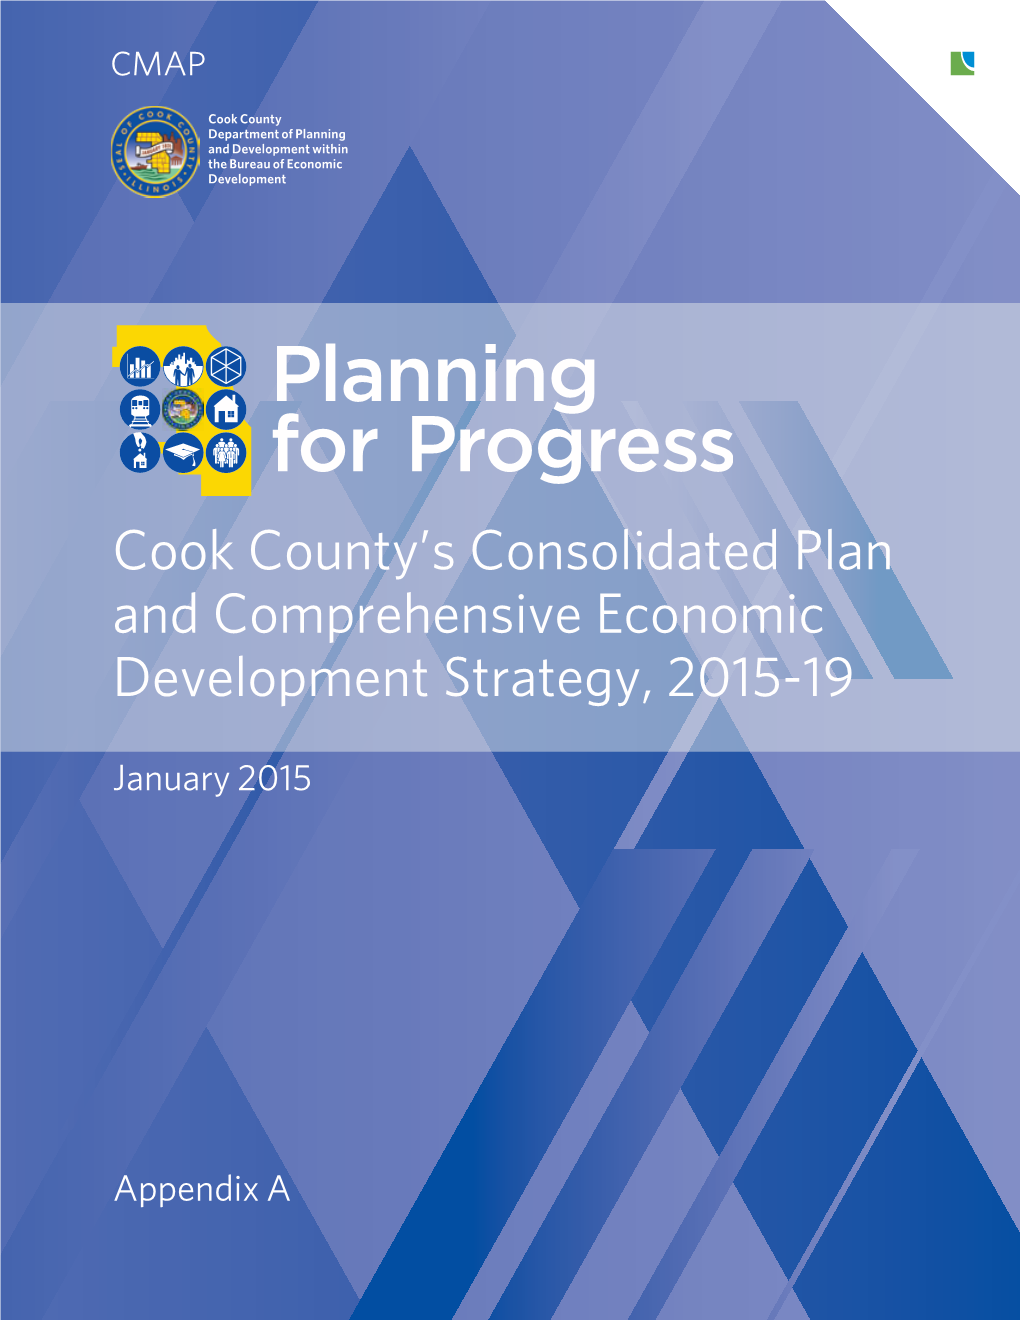 Cook County's Consolidated Plan and Comprehensive Economic